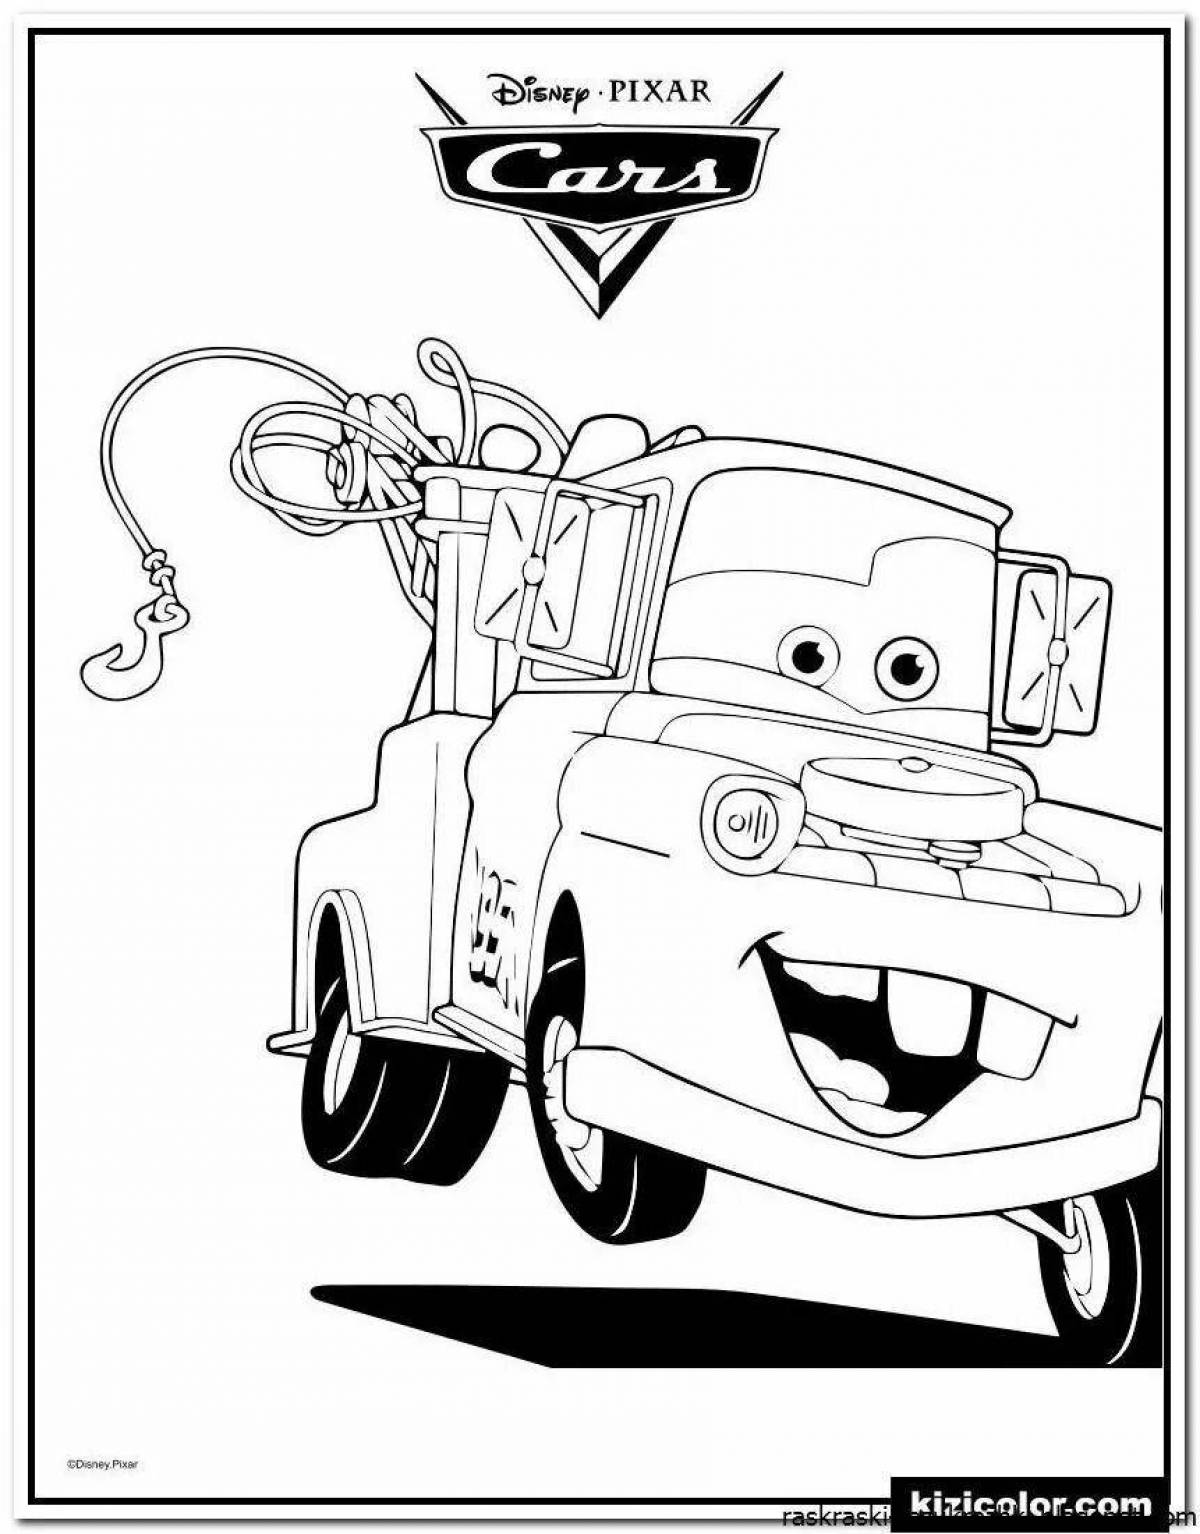 Lightning mcqueen's magical coloring book